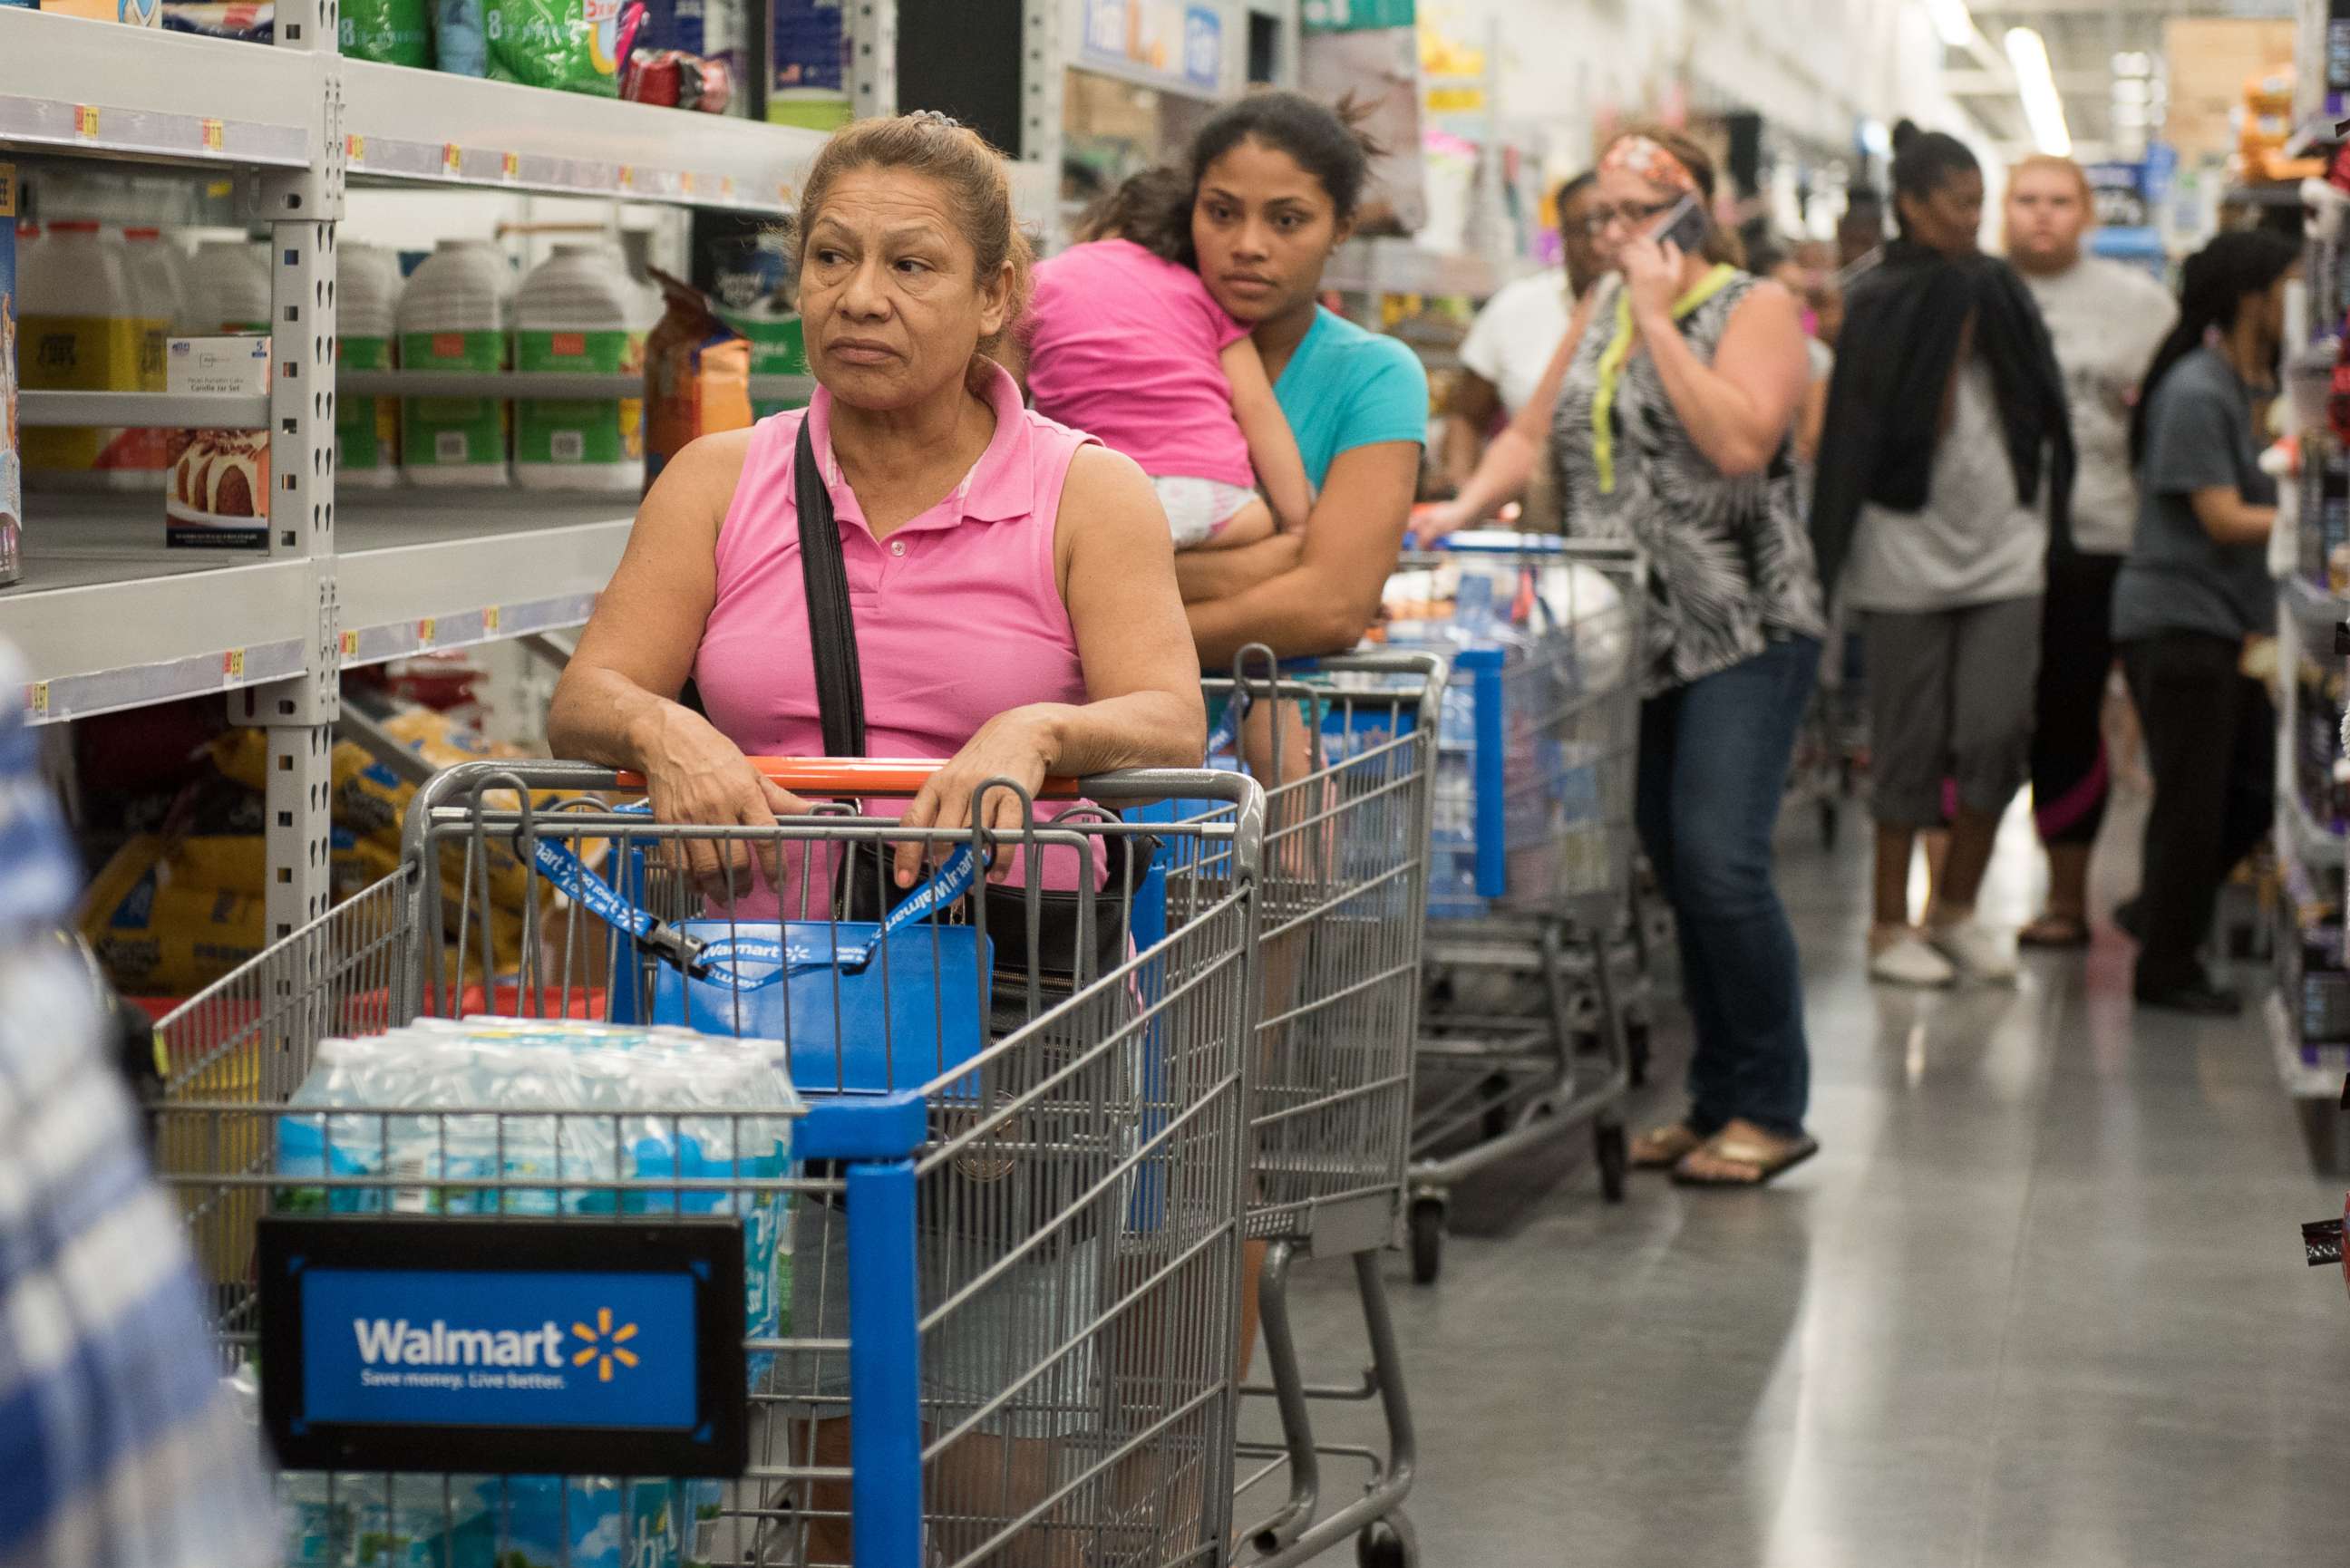 PHOTO: Canned food shelves at Walmart in Fort Lauderdale, Fla., Sept. 5, 2017, while residents stock up with groceries in preparation for hurricane Irma.